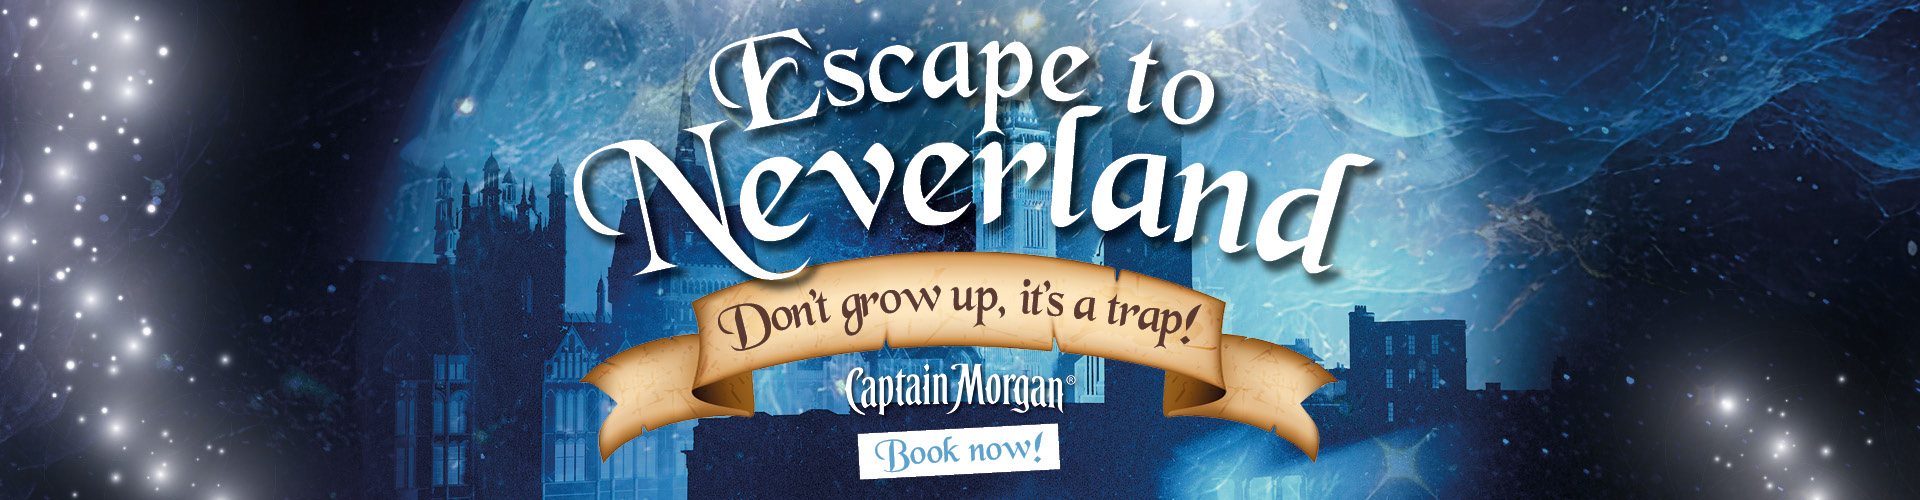 Escape to Neverland this NYE at Popworld and Zinc Redditch